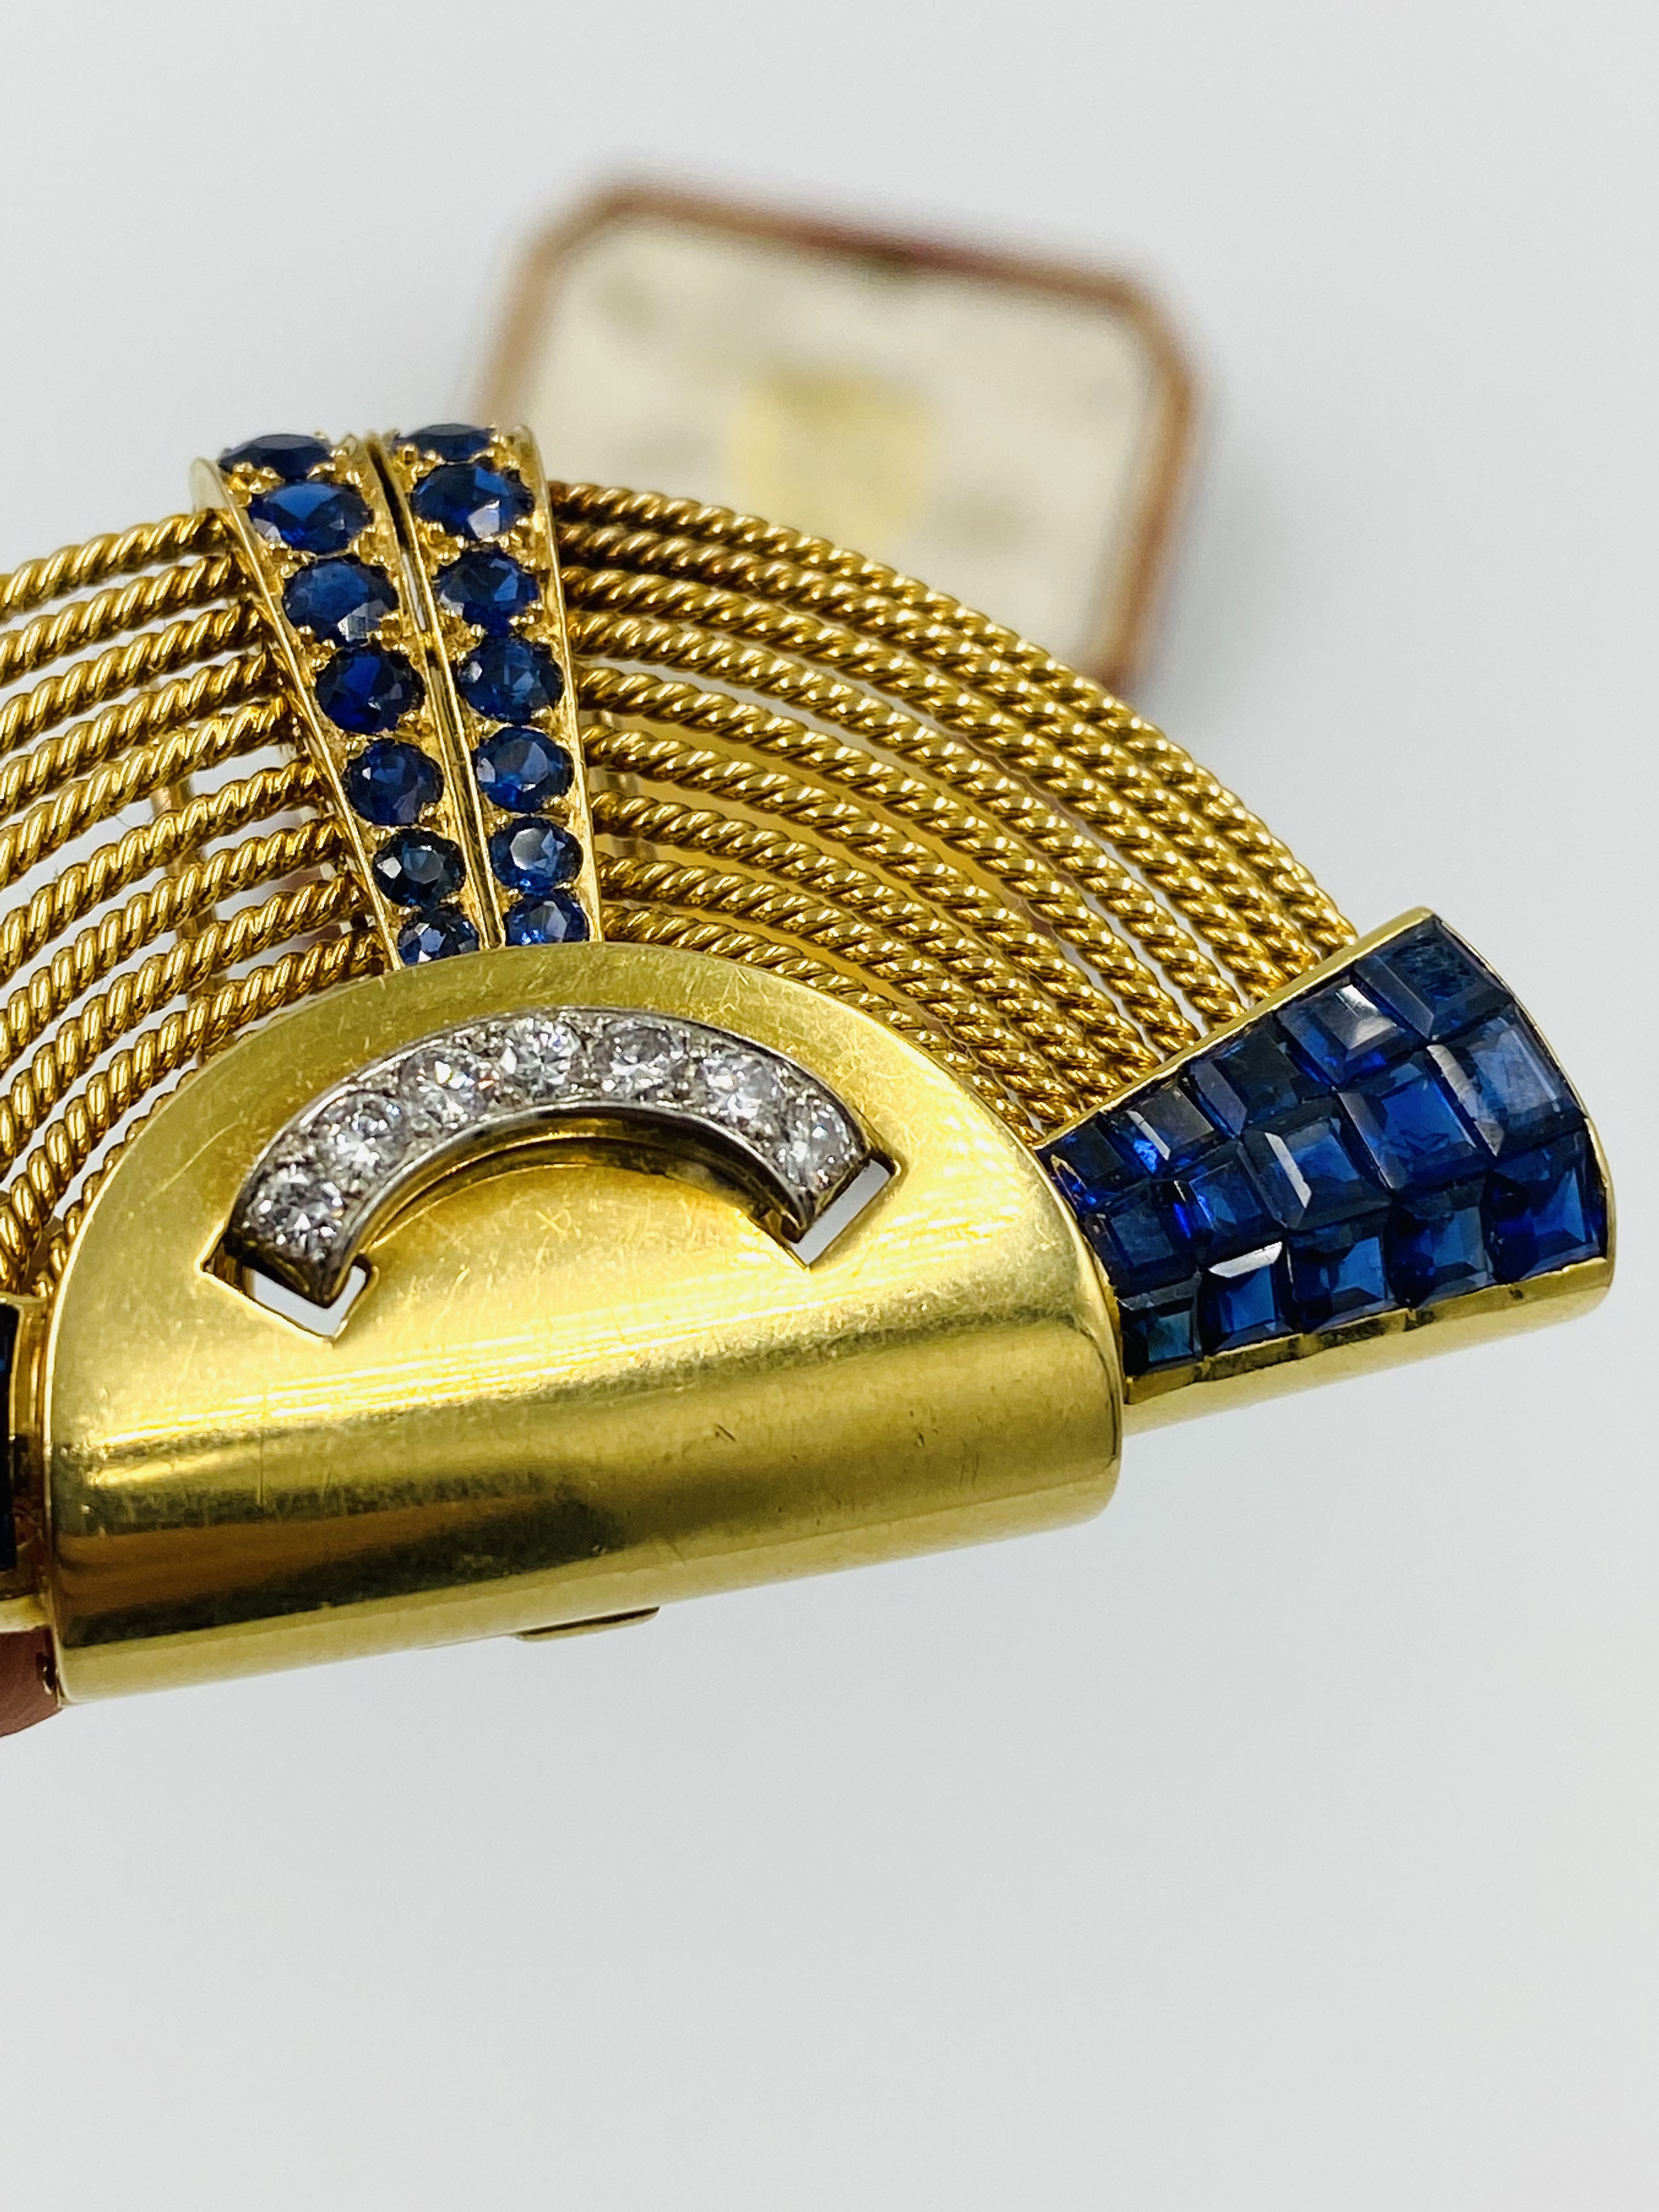 Franch gold clip set with sapphires and diamonds - Image 7 of 9